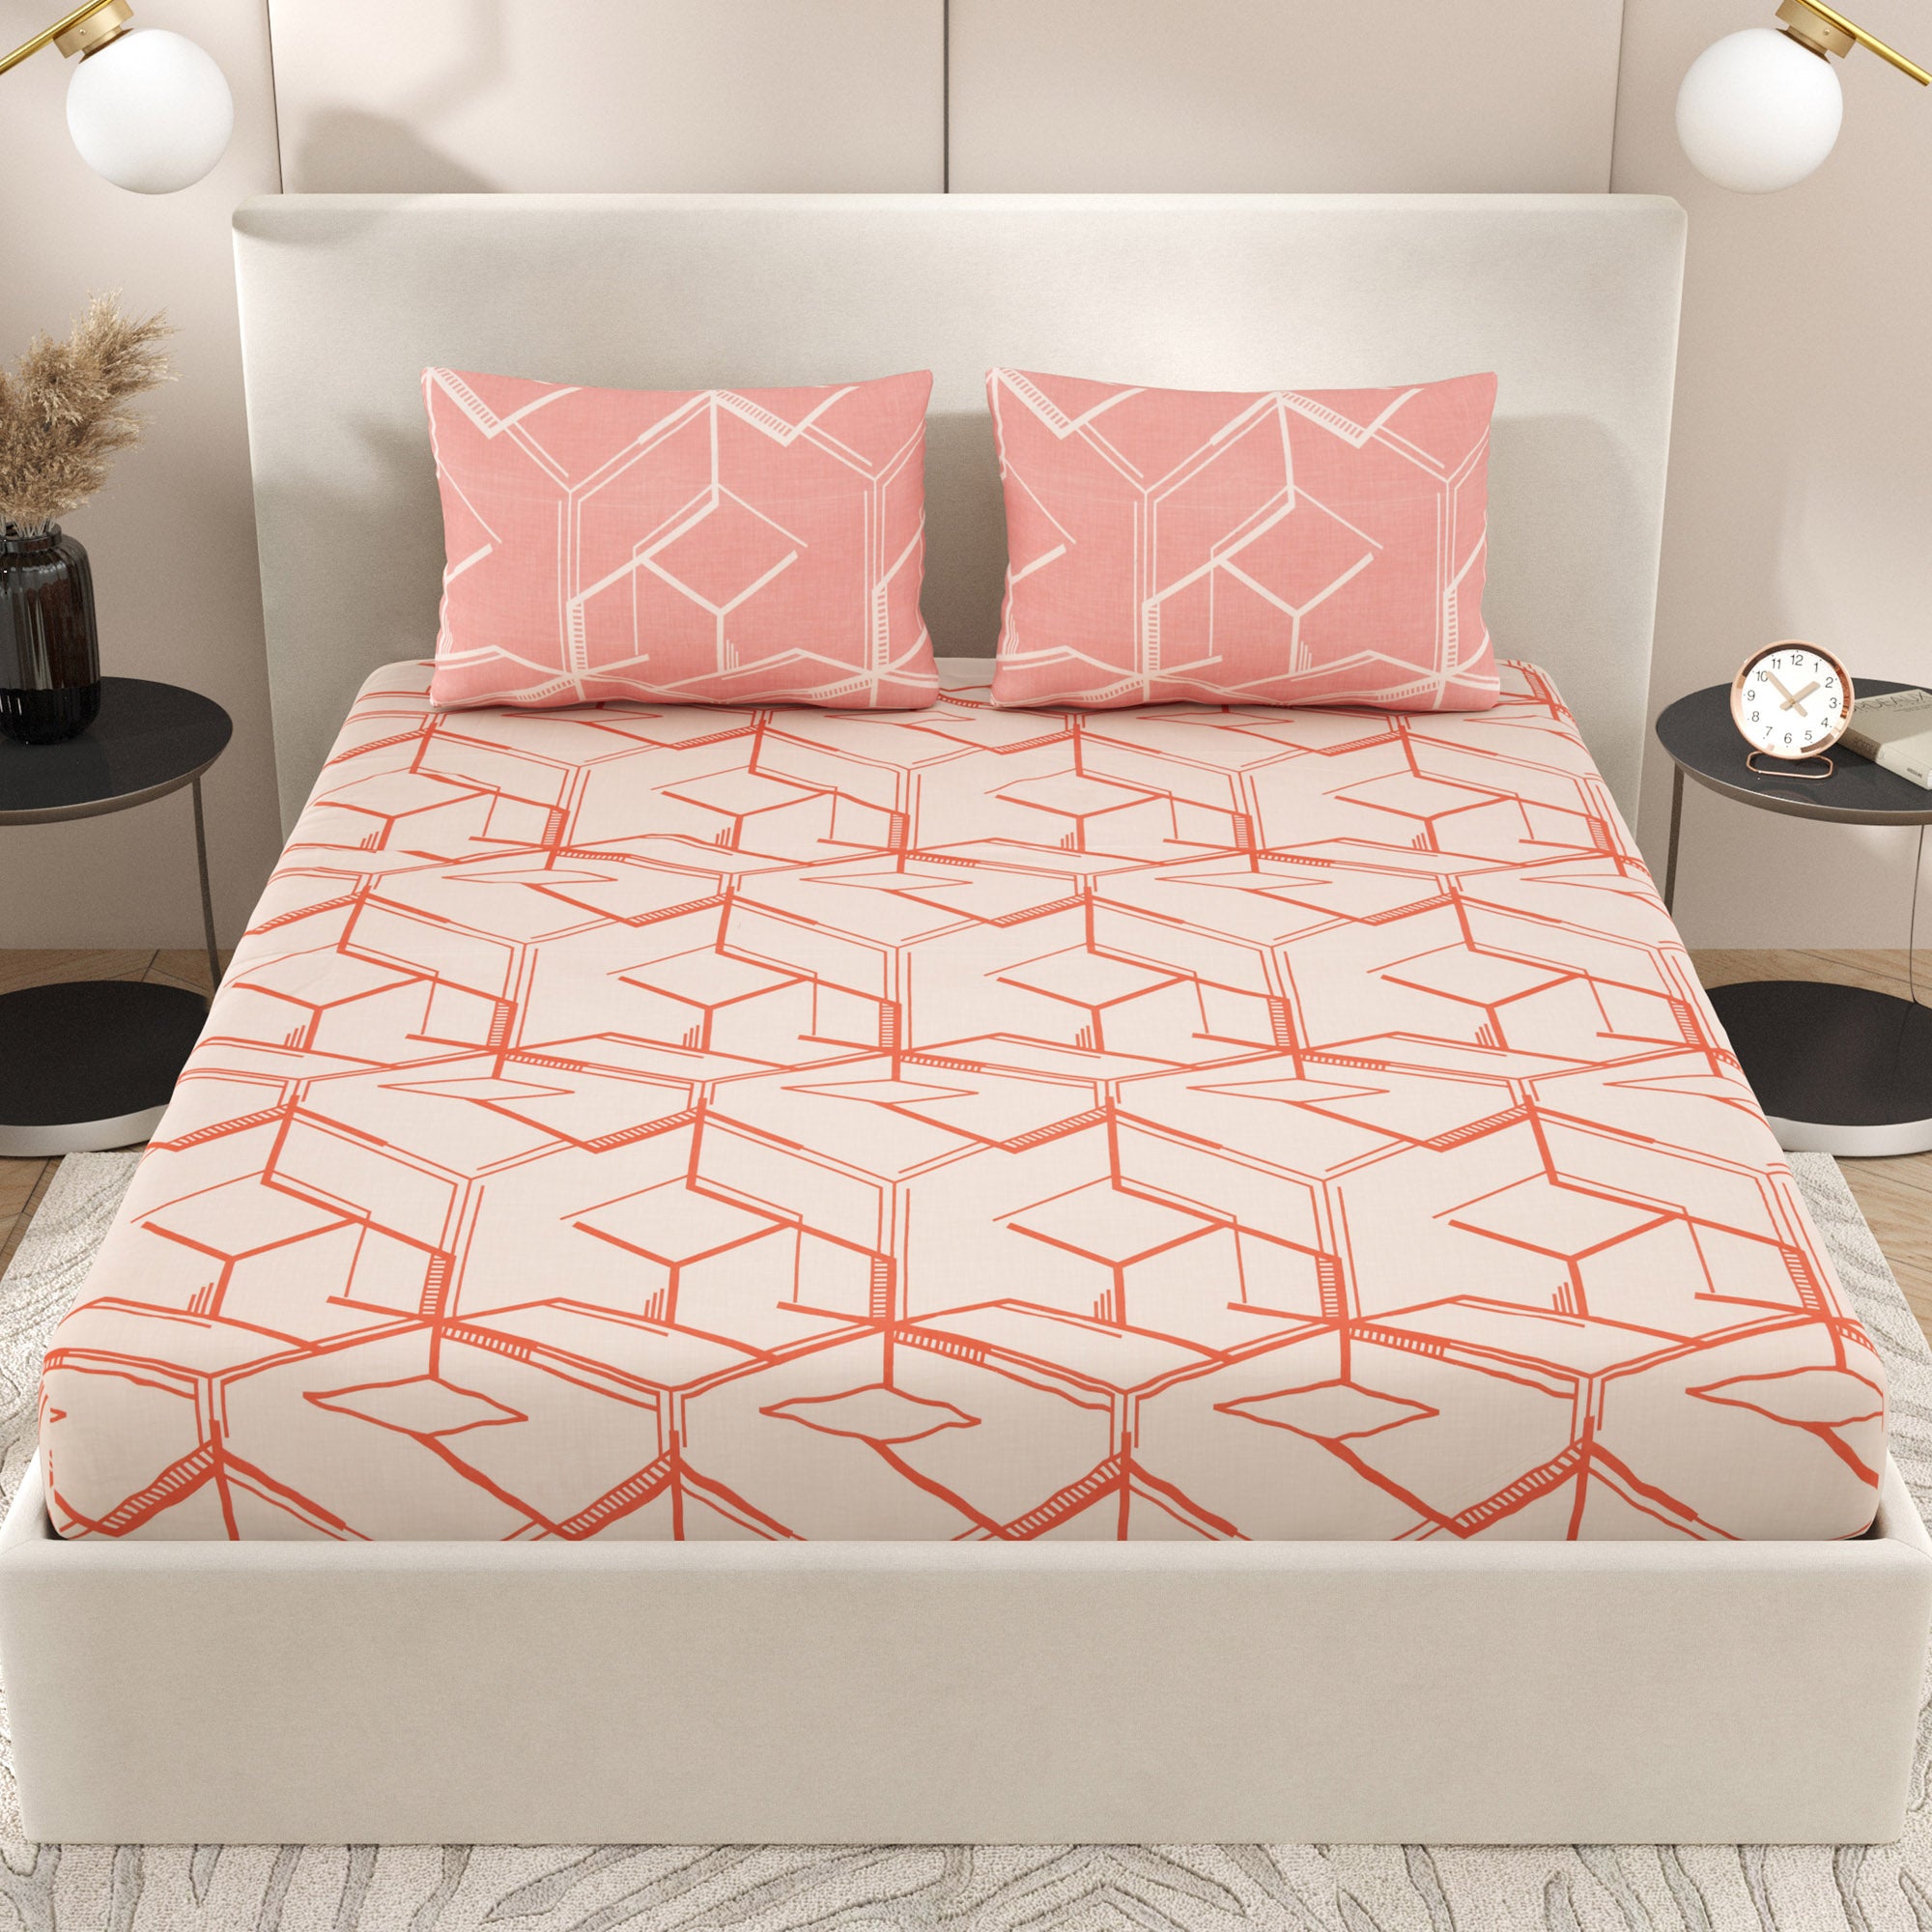 eCraftIndia 250 TC Rose Geometric Printed Cotton Double Bedsheet With 2 Pillow Covers